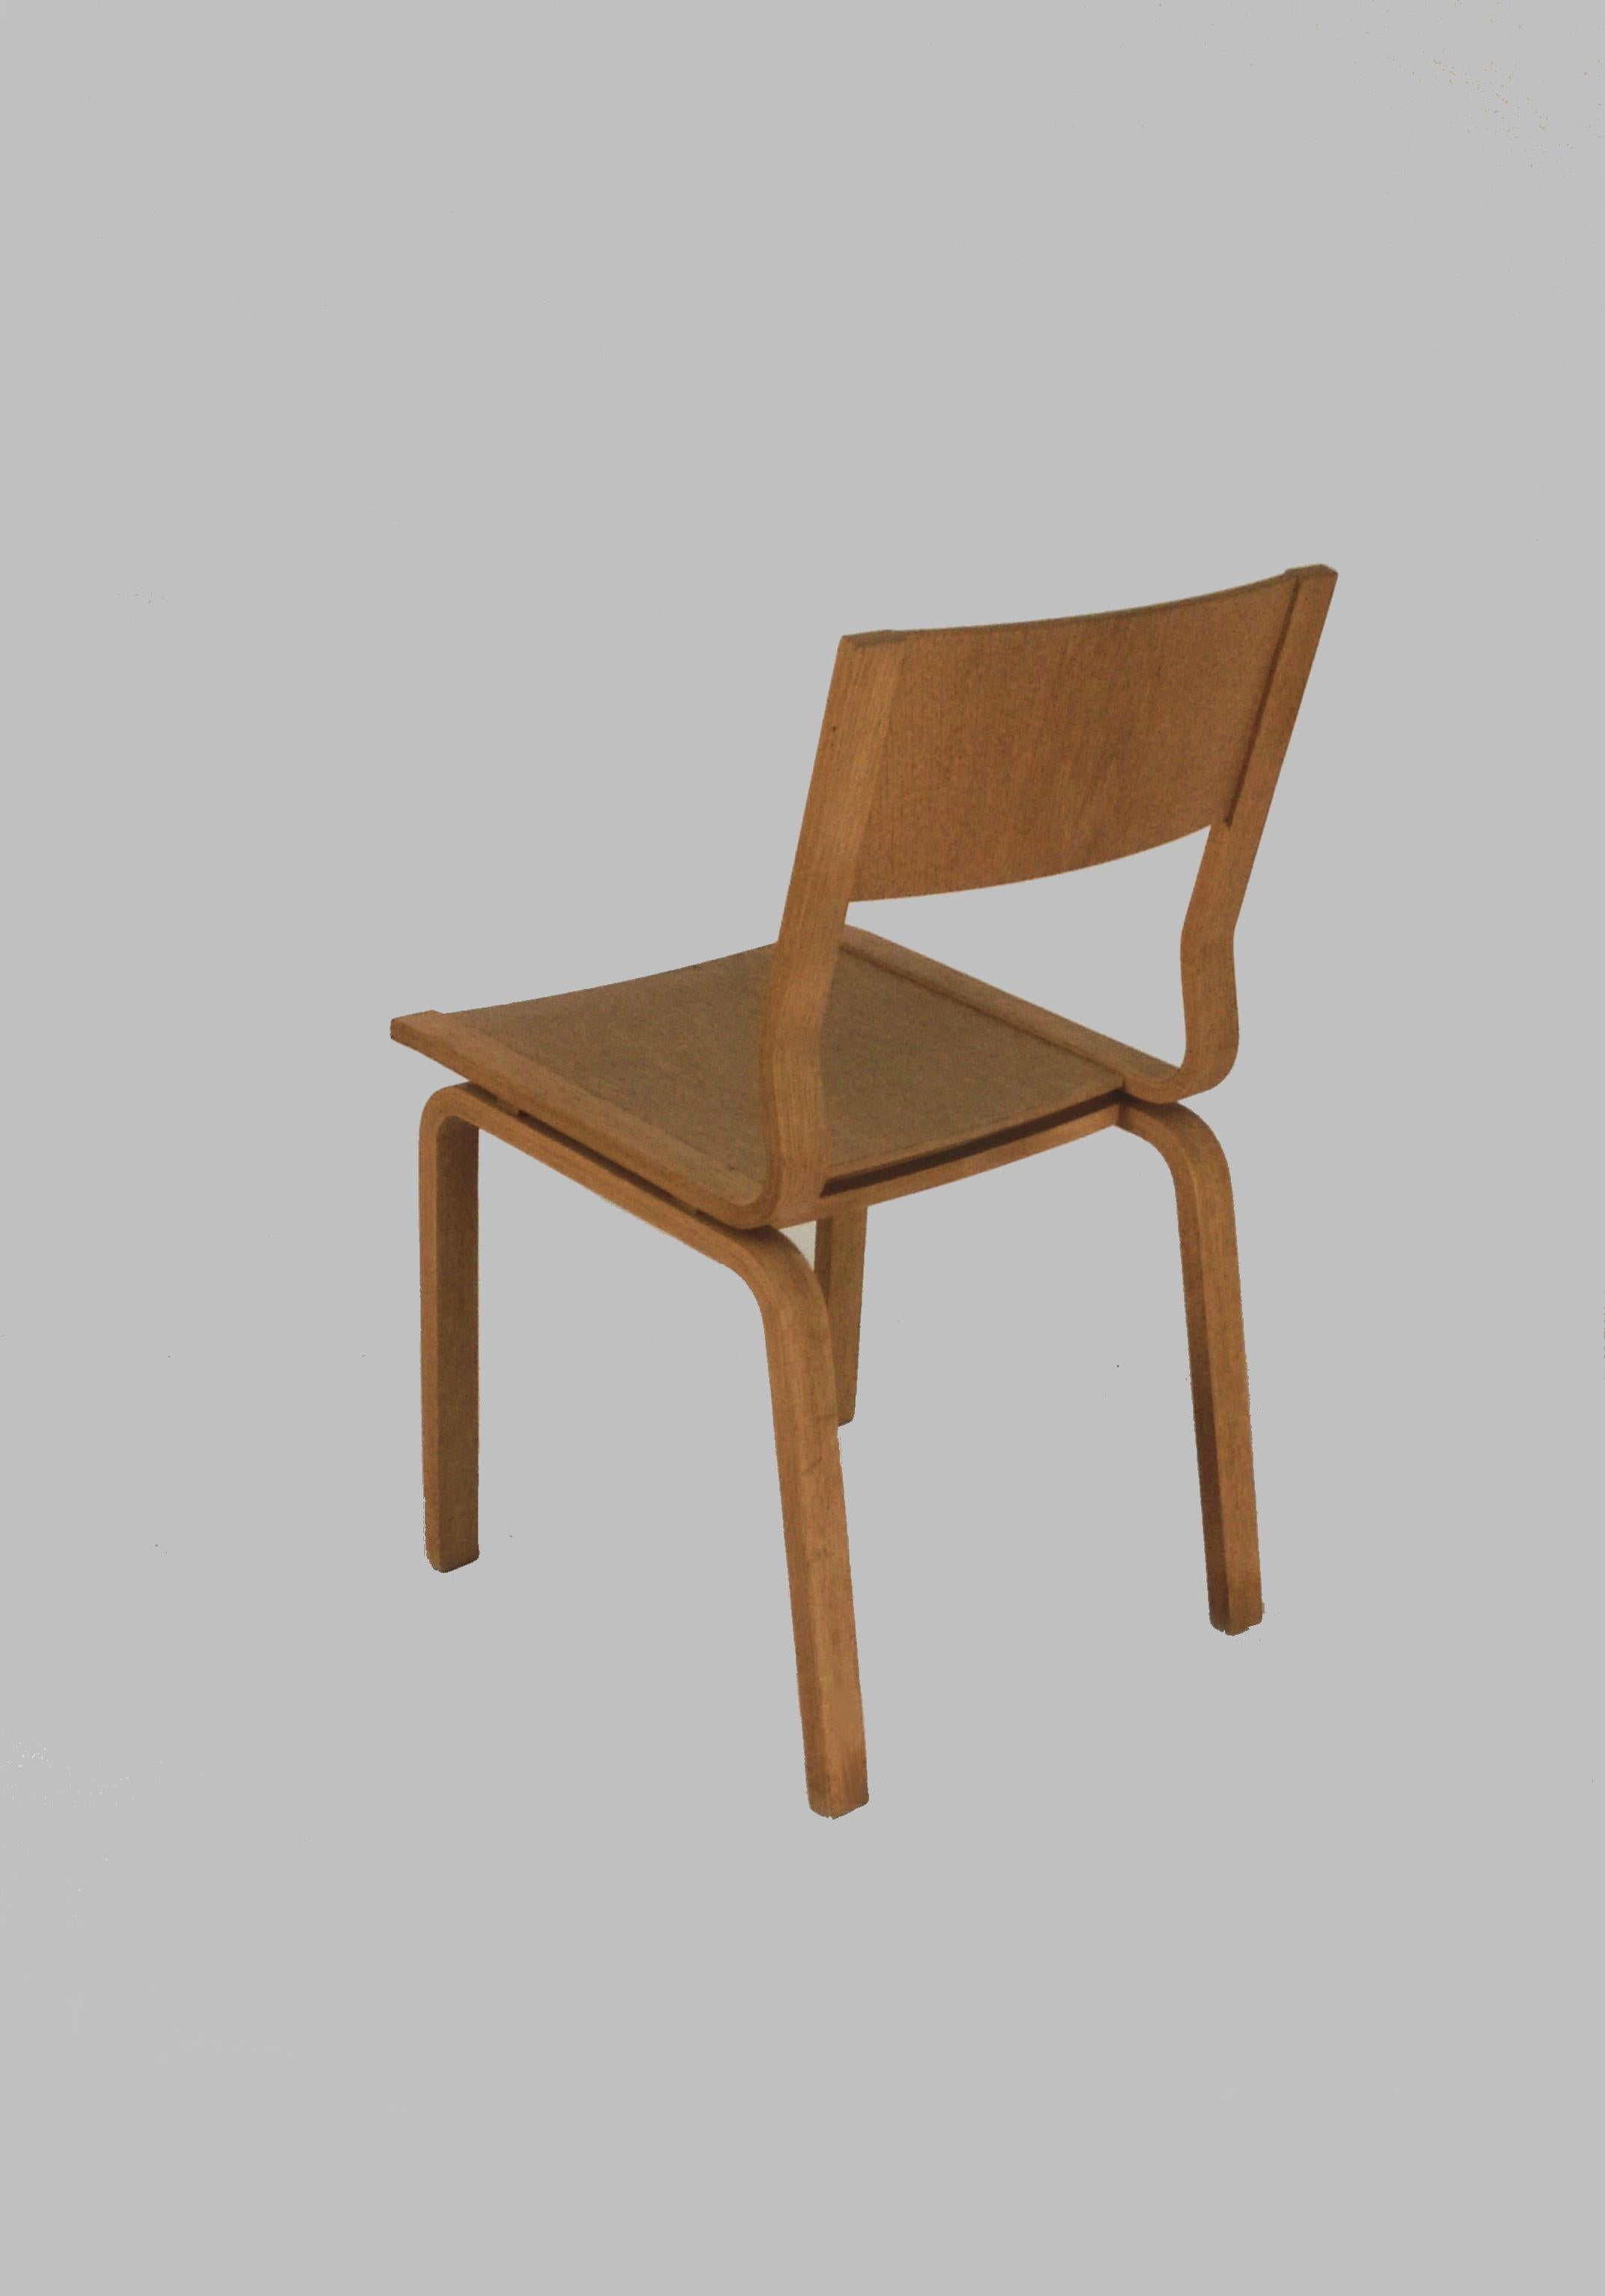 1965 Arne Jacobsen Set of Two Saint Catherines Chairs in Laminated Oak In Good Condition In Knebel, DK